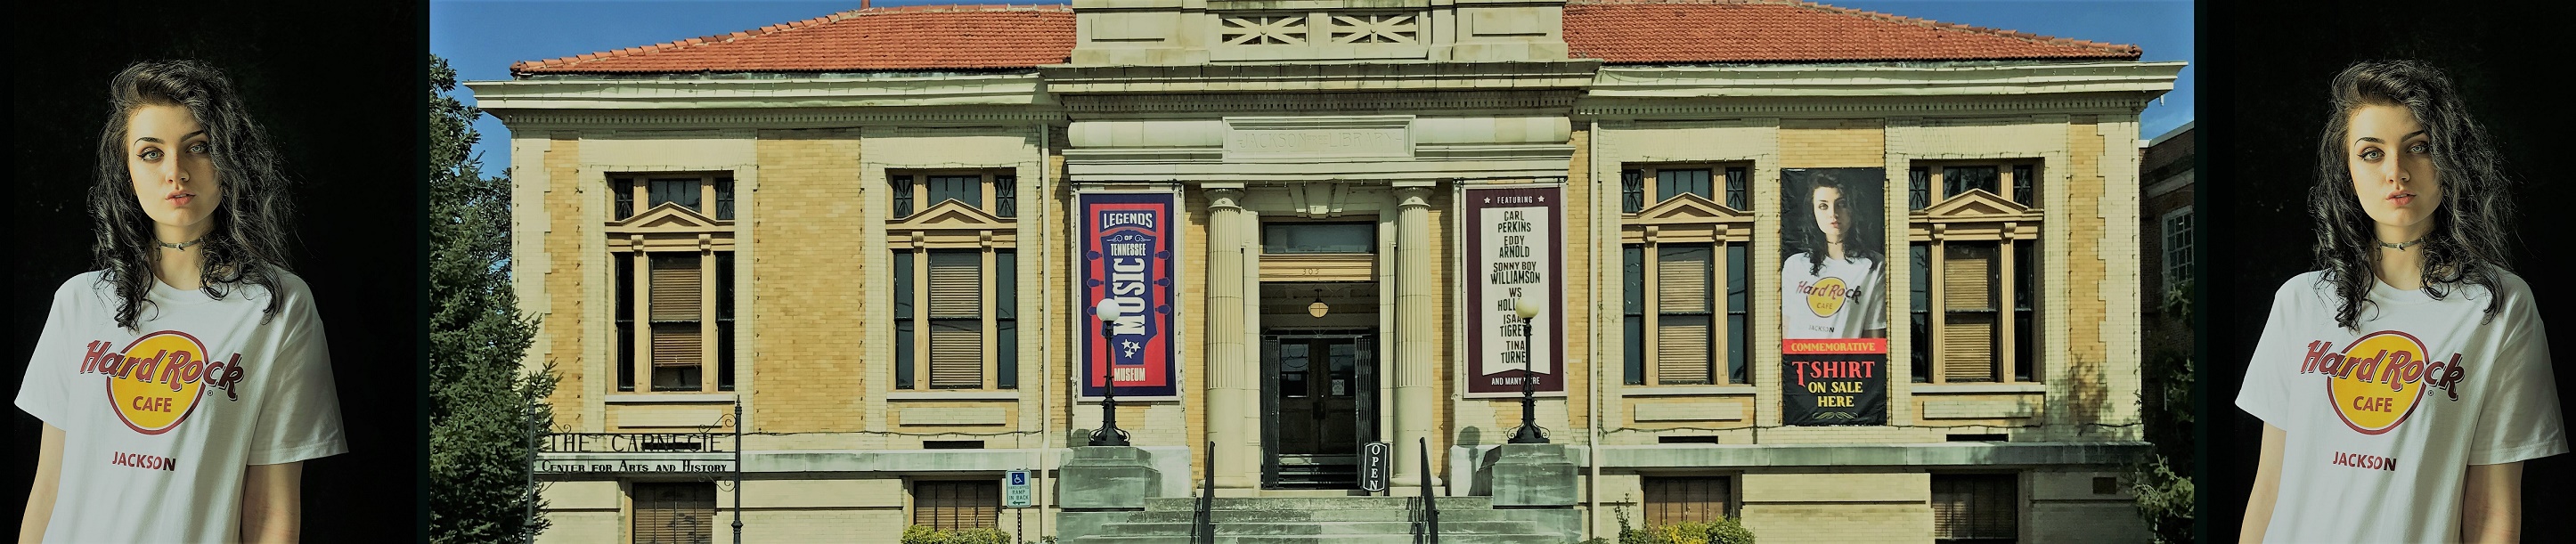 Legends of Tennessee Music Museum